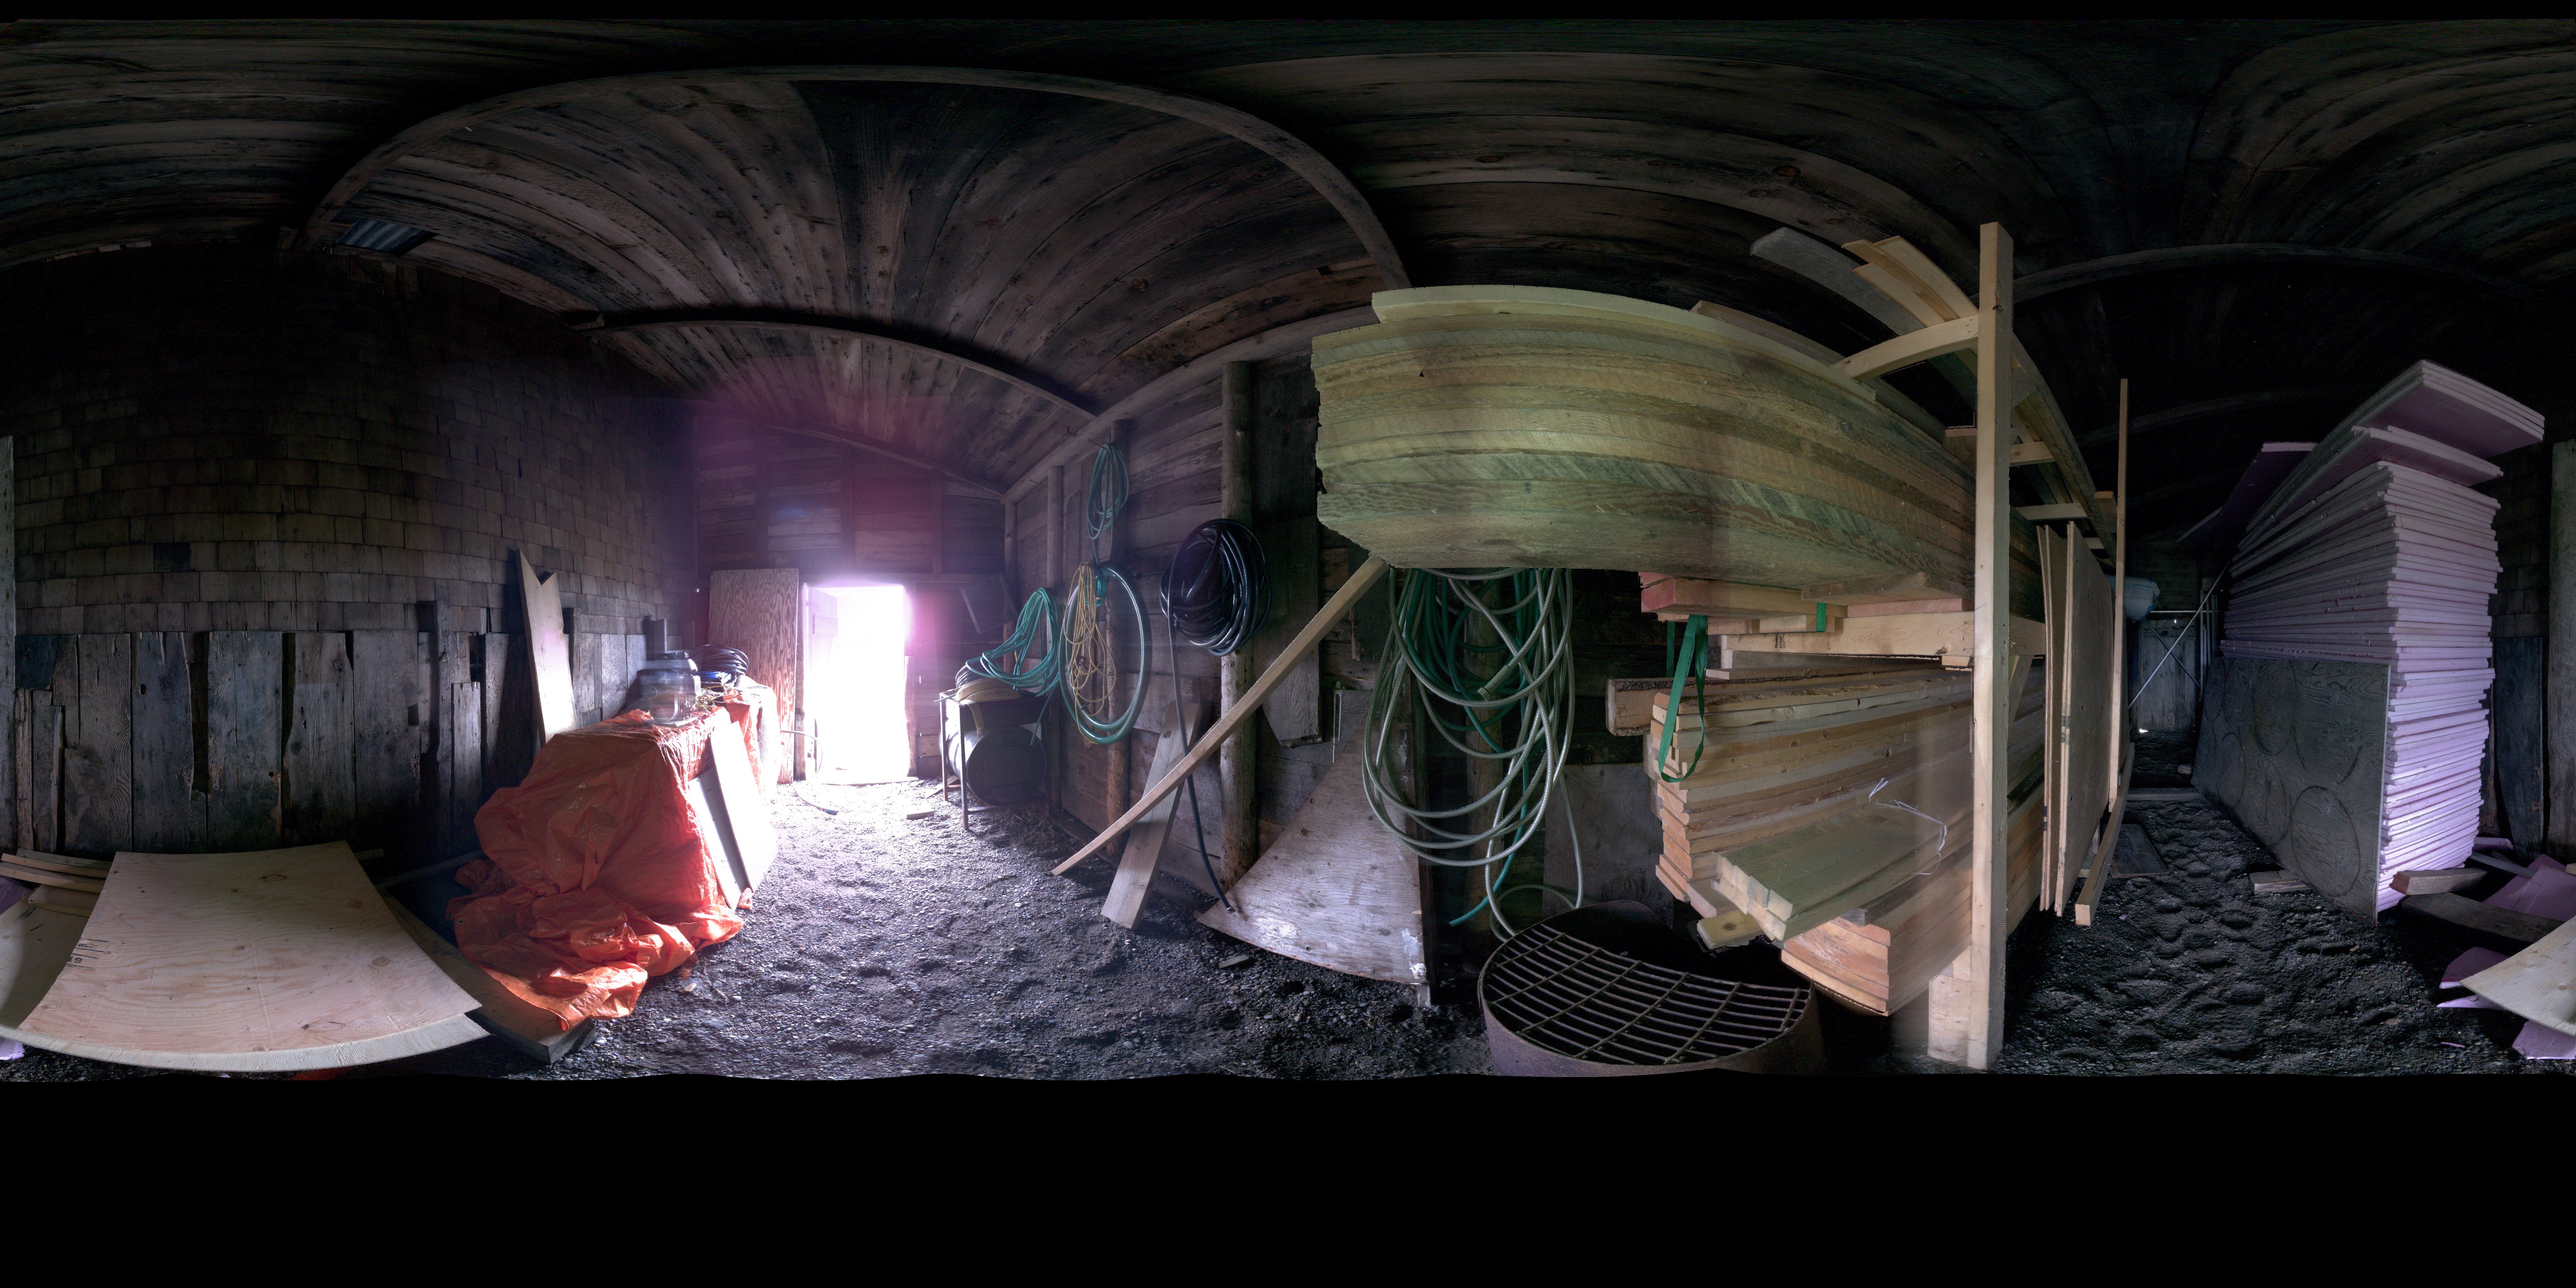 Panoramic view of the Pacific Steam Whaling Co. Bonehouse interior from the Leica BKL 360, scanning location 4